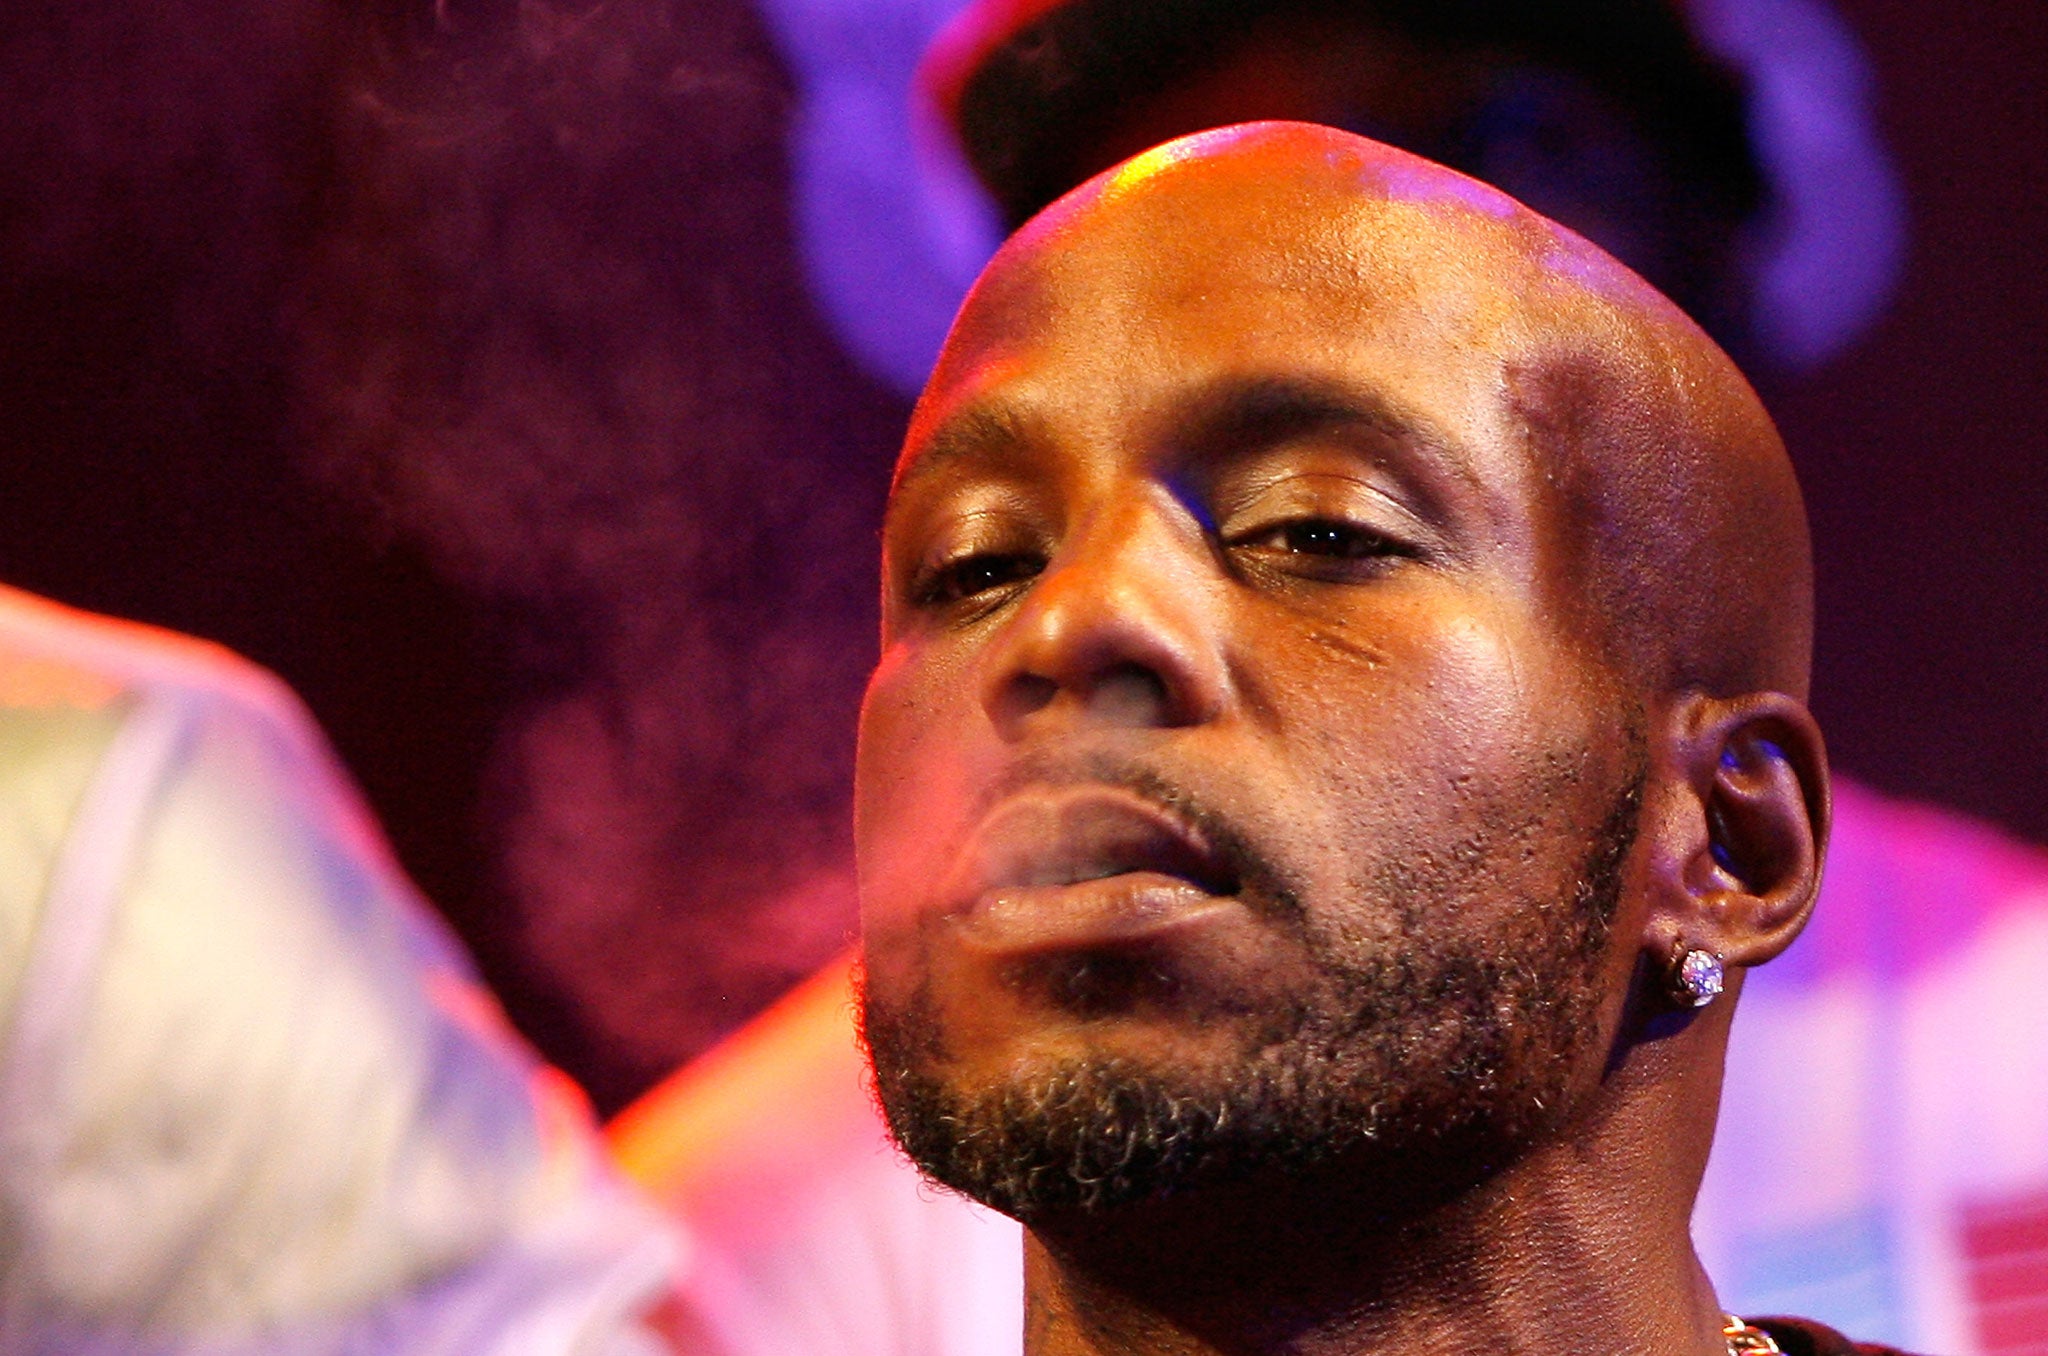 Rapper DMX smokes a cigarette during the 2012 Rock the Bells Festival press conference on June 13, 2012 in New York City.